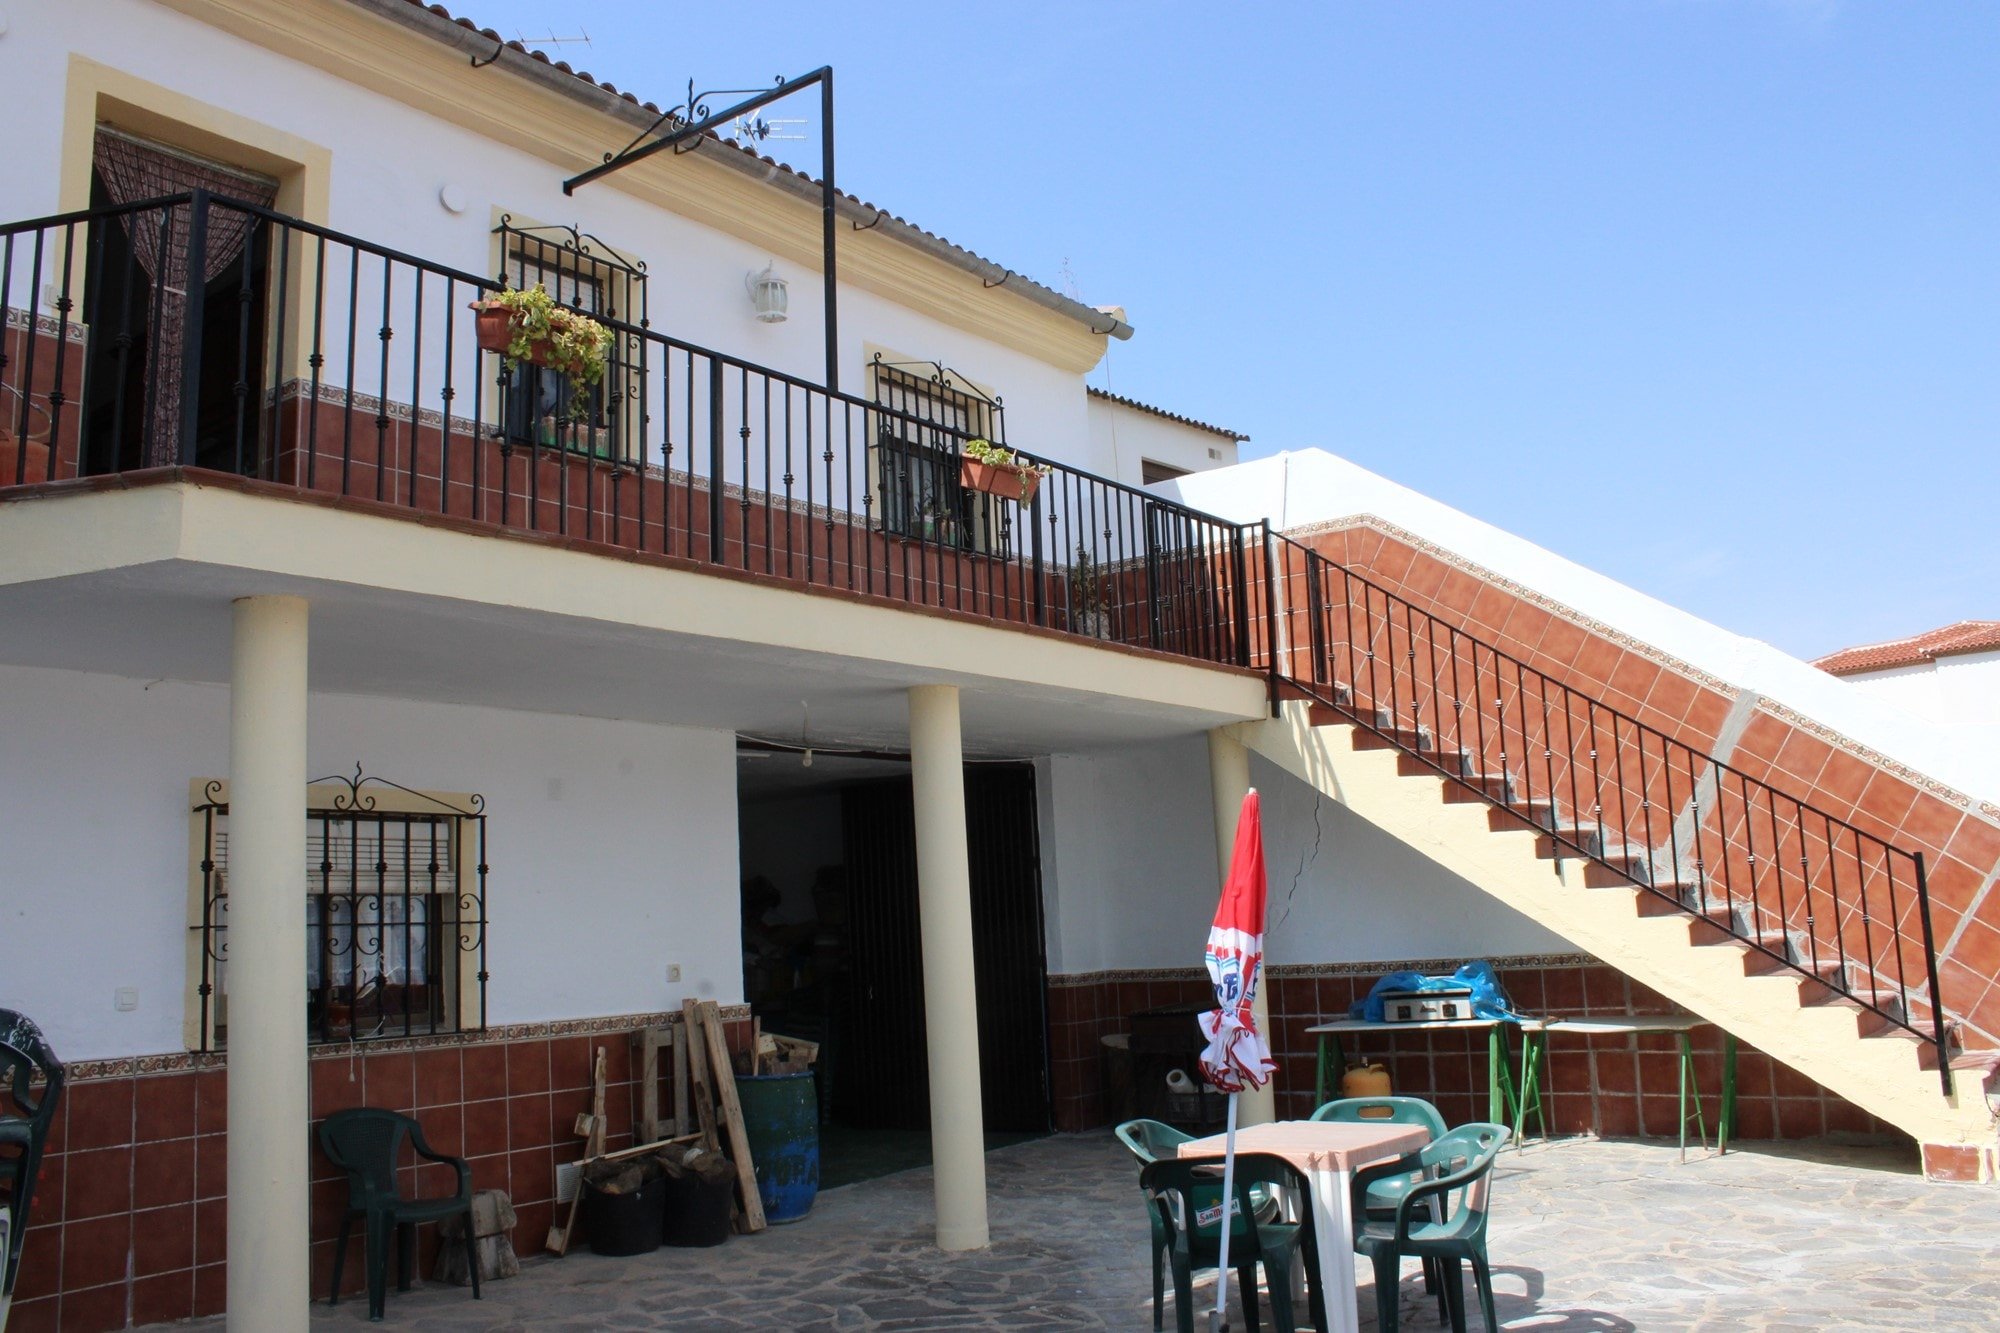 LARGE 4-BEDROOM HOUSE IN MONTEJAQUE with development potential - 185,000€